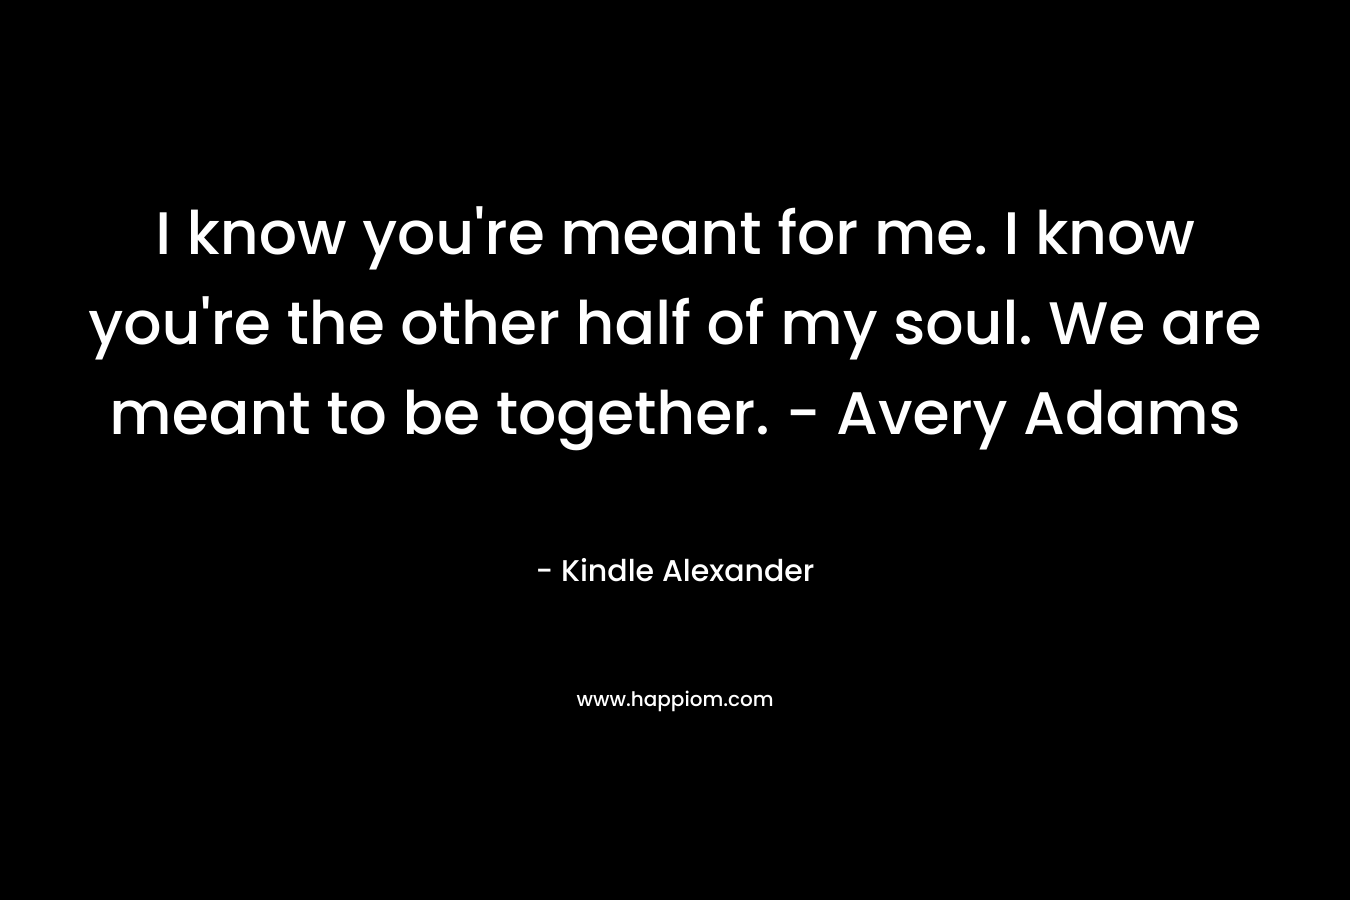 I know you're meant for me. I know you're the other half of my soul. We are meant to be together. - Avery Adams